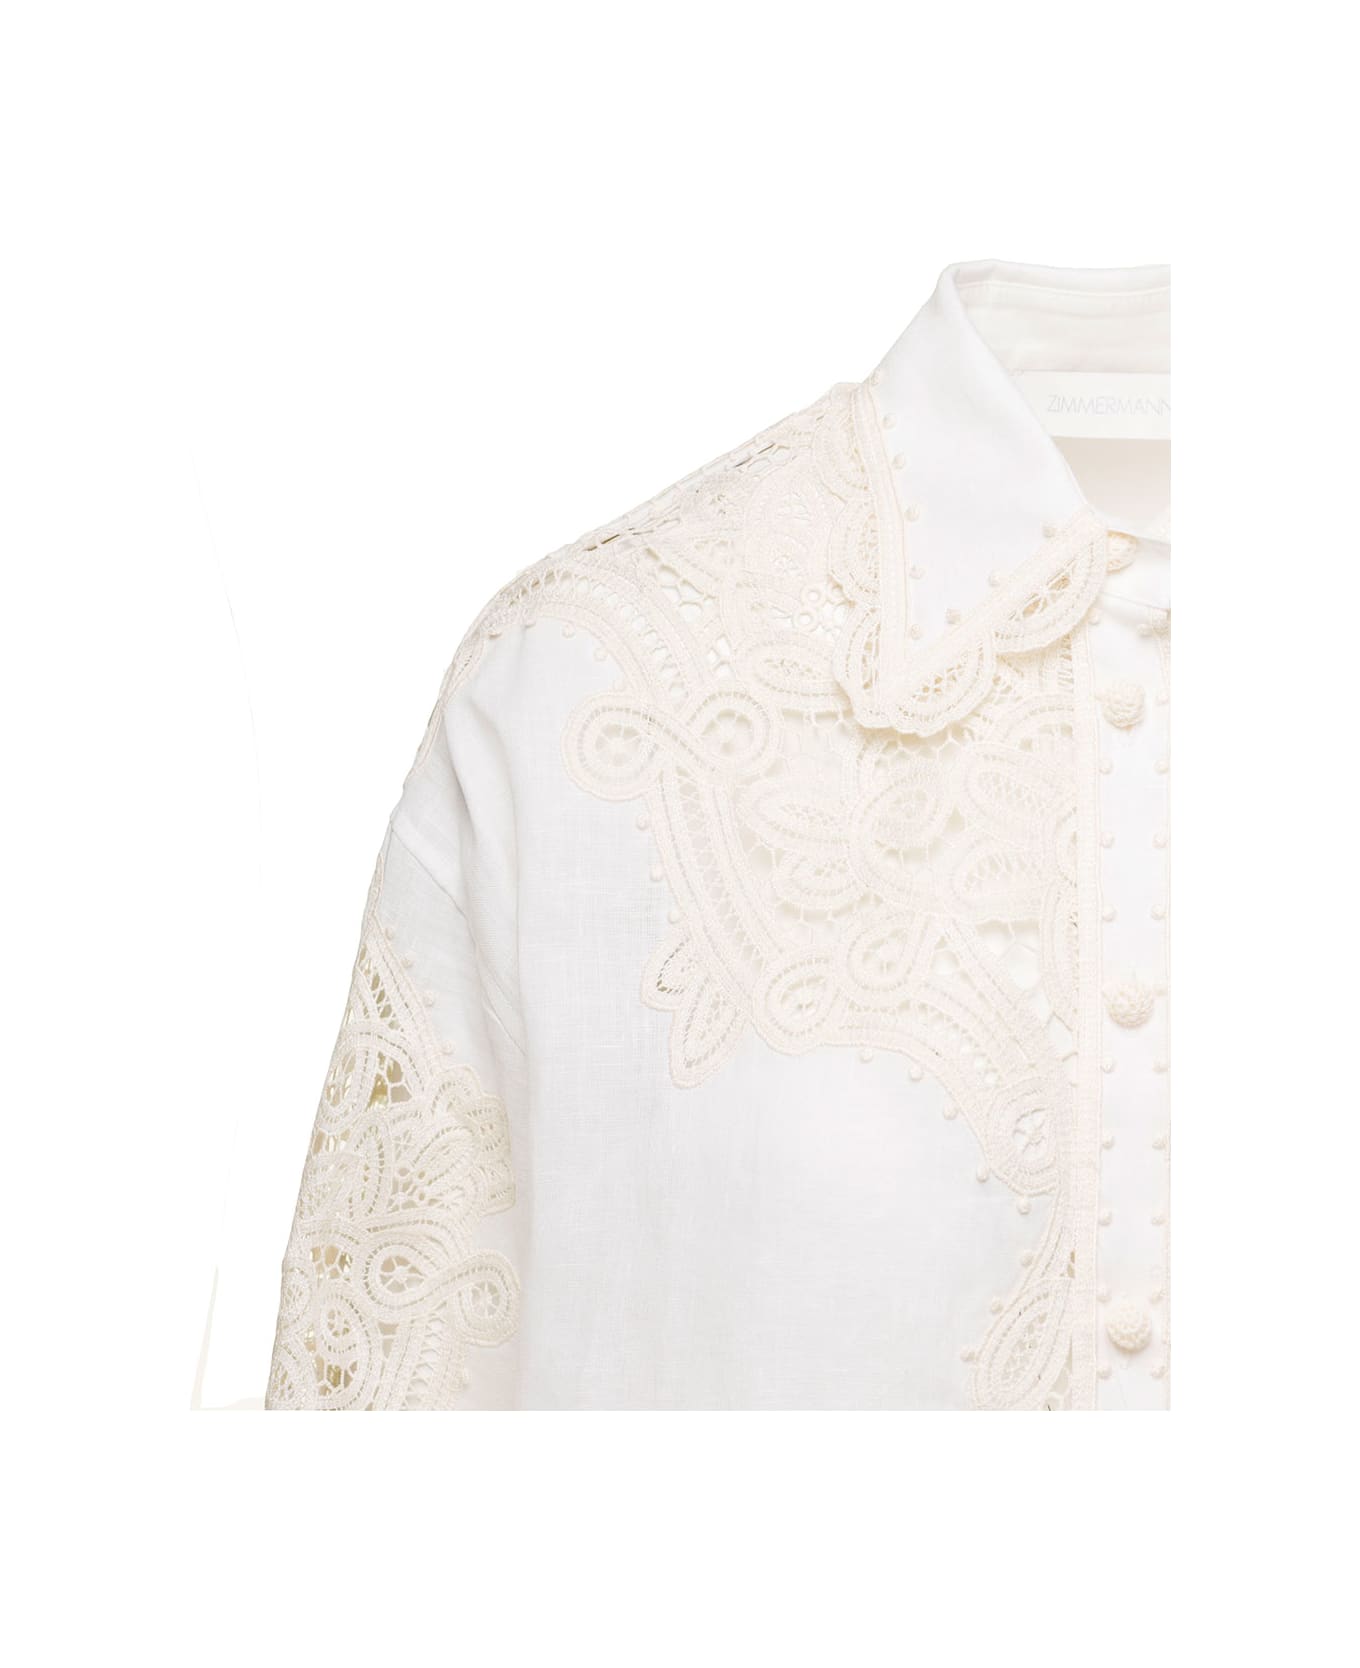 Zimmermann 'tiggy' White Shirt With All-over Lace Inserts In Linen Woman - White